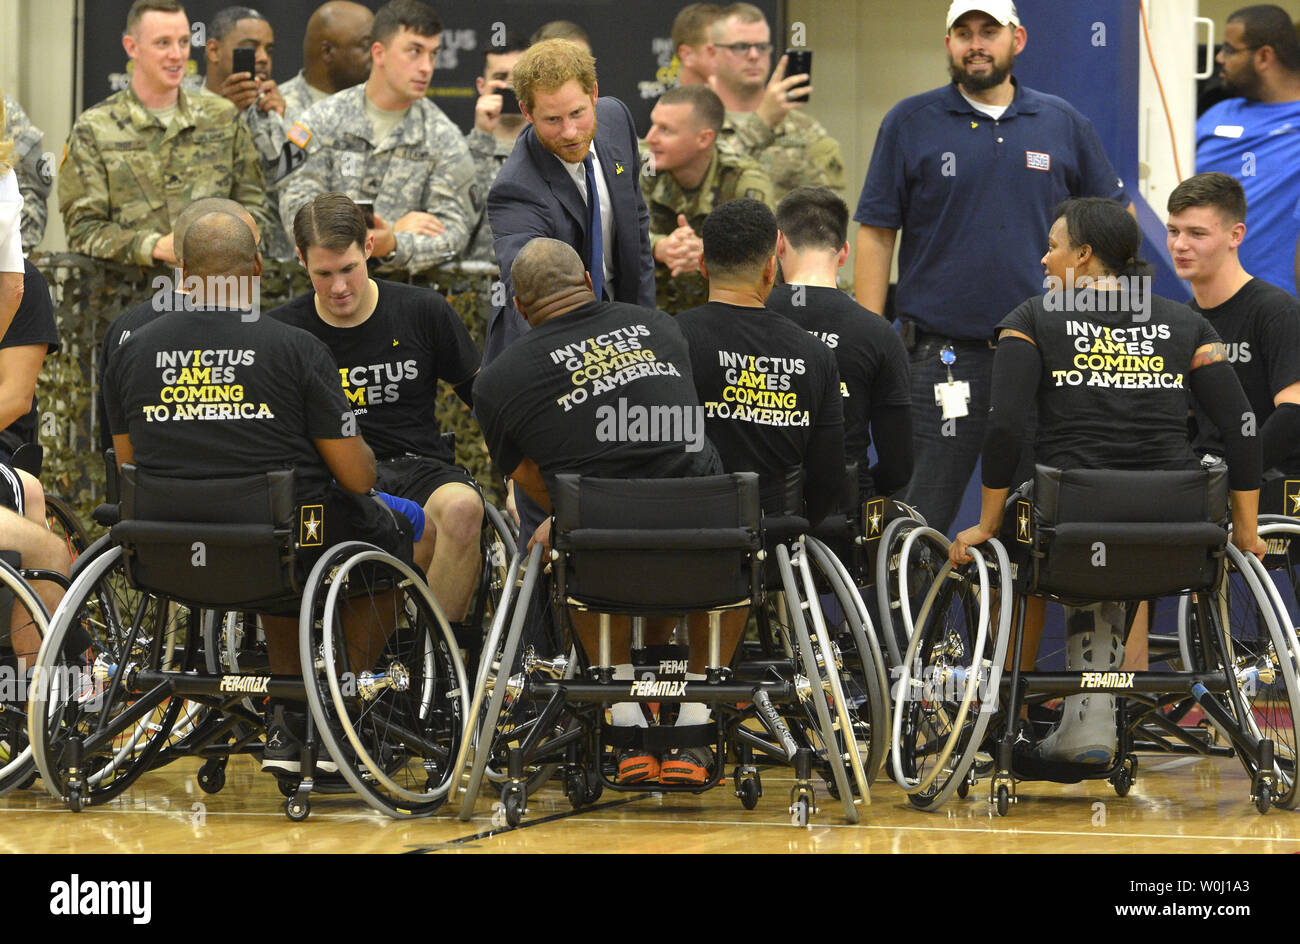 HRH Prince Harry thanks members of the basketball team at the conclusion of  a game by wounded service members, October 28, 2015, at Ft. Belvoir, Virginia. The event is a celebration of the Joining Forces Initiative and the upcoming 2016 Invictus Games in Orlando, Florida, in which wounded military personnel compete in sporting competition.       Photo by Mike Theiler/UPI Stock Photo